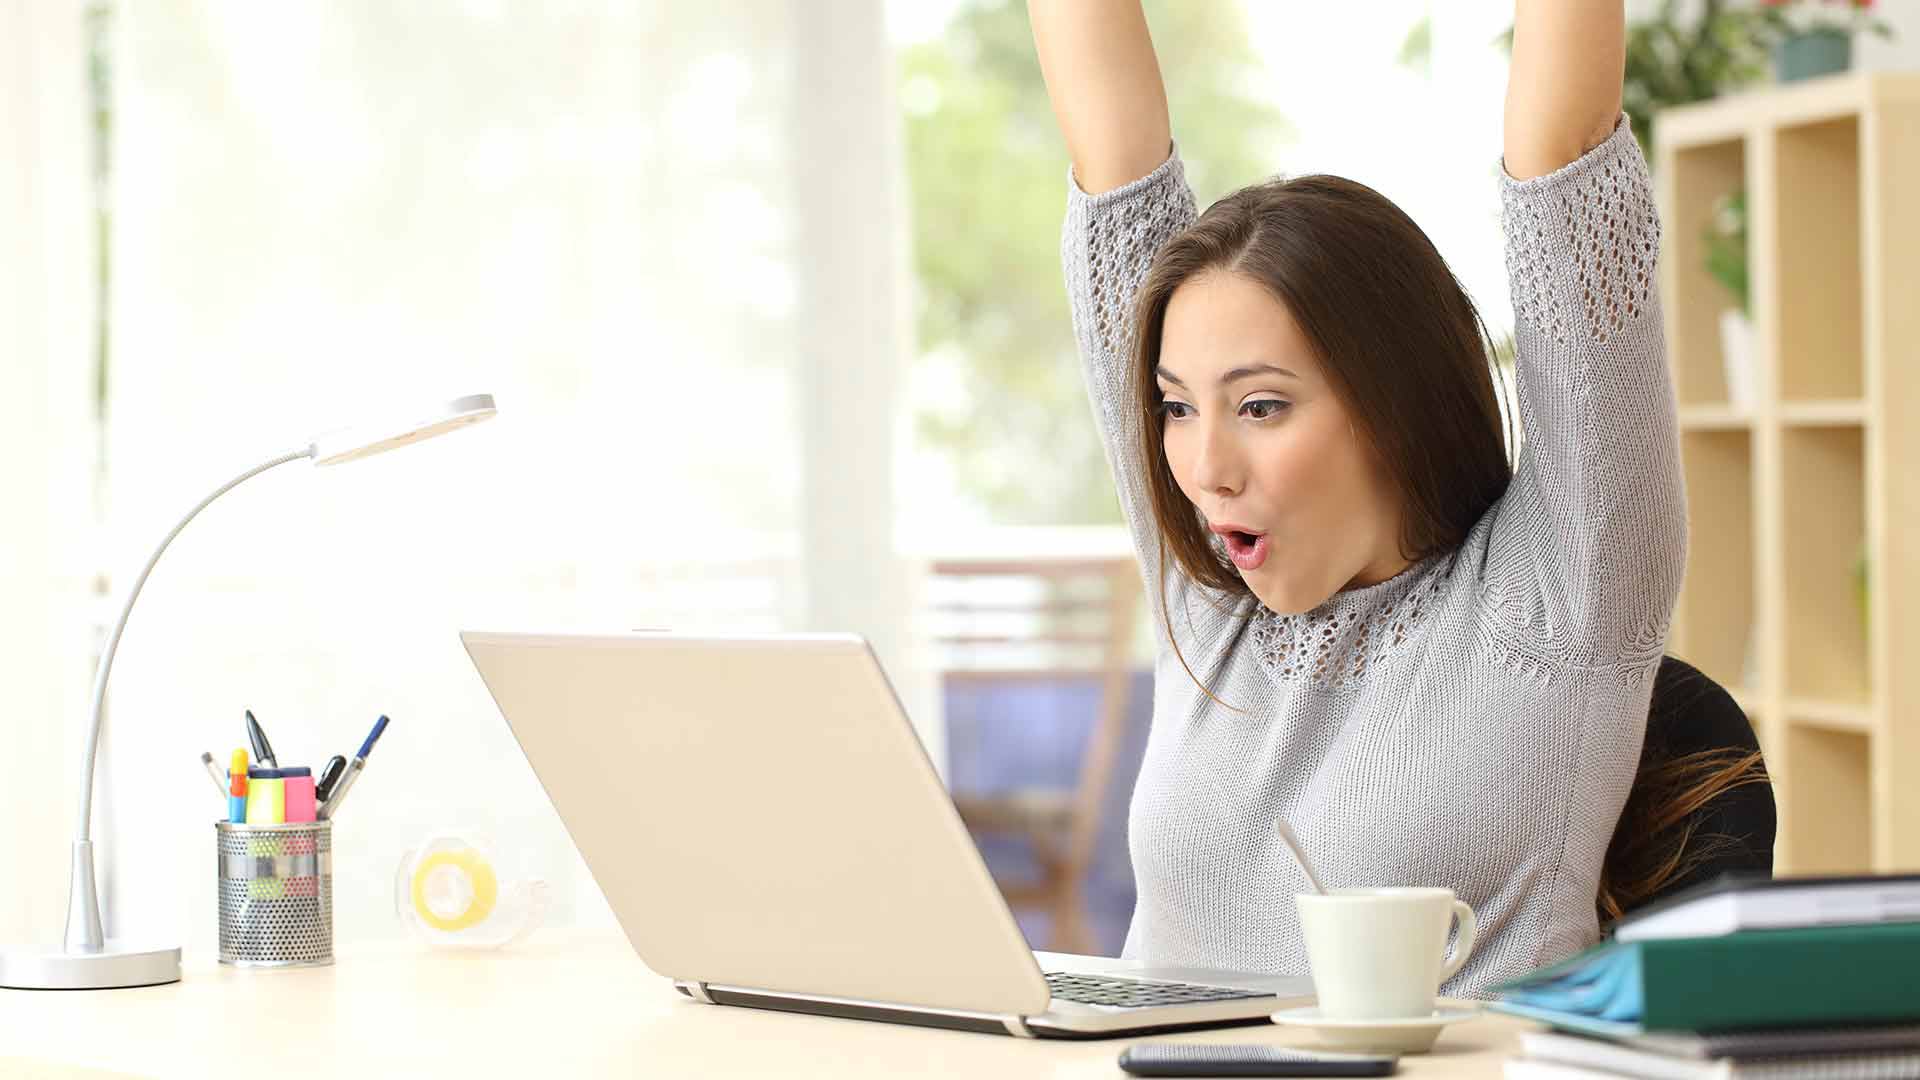 Excited student searching on their computer